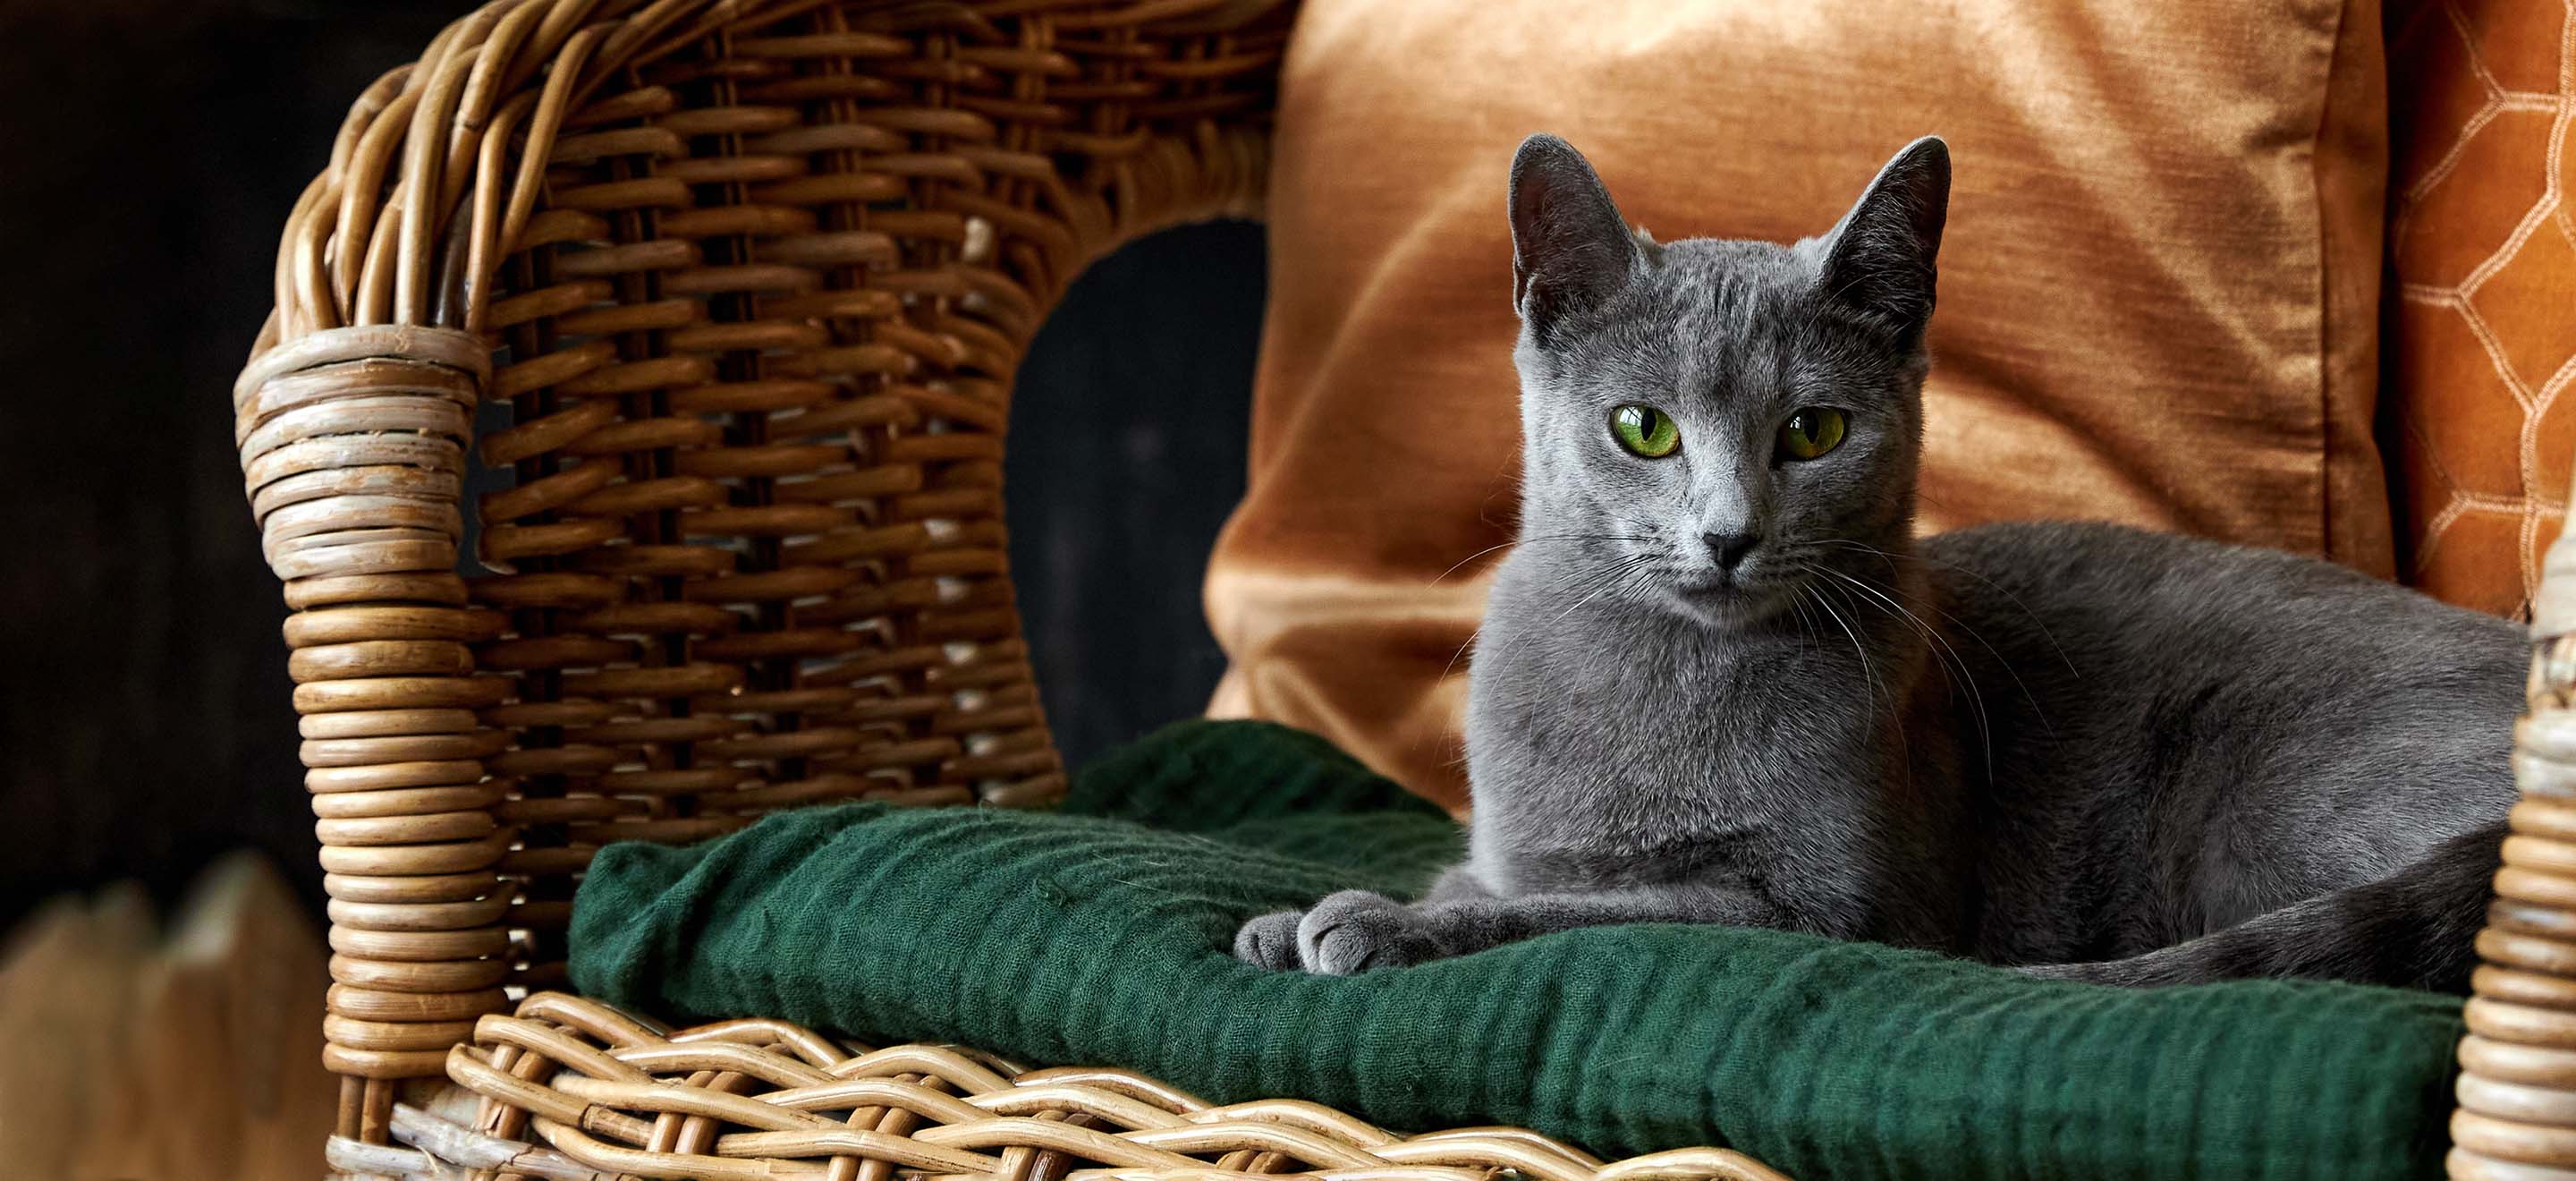 Russian Blue Kittens for Sale - Russian Blue Kittens for Adoption